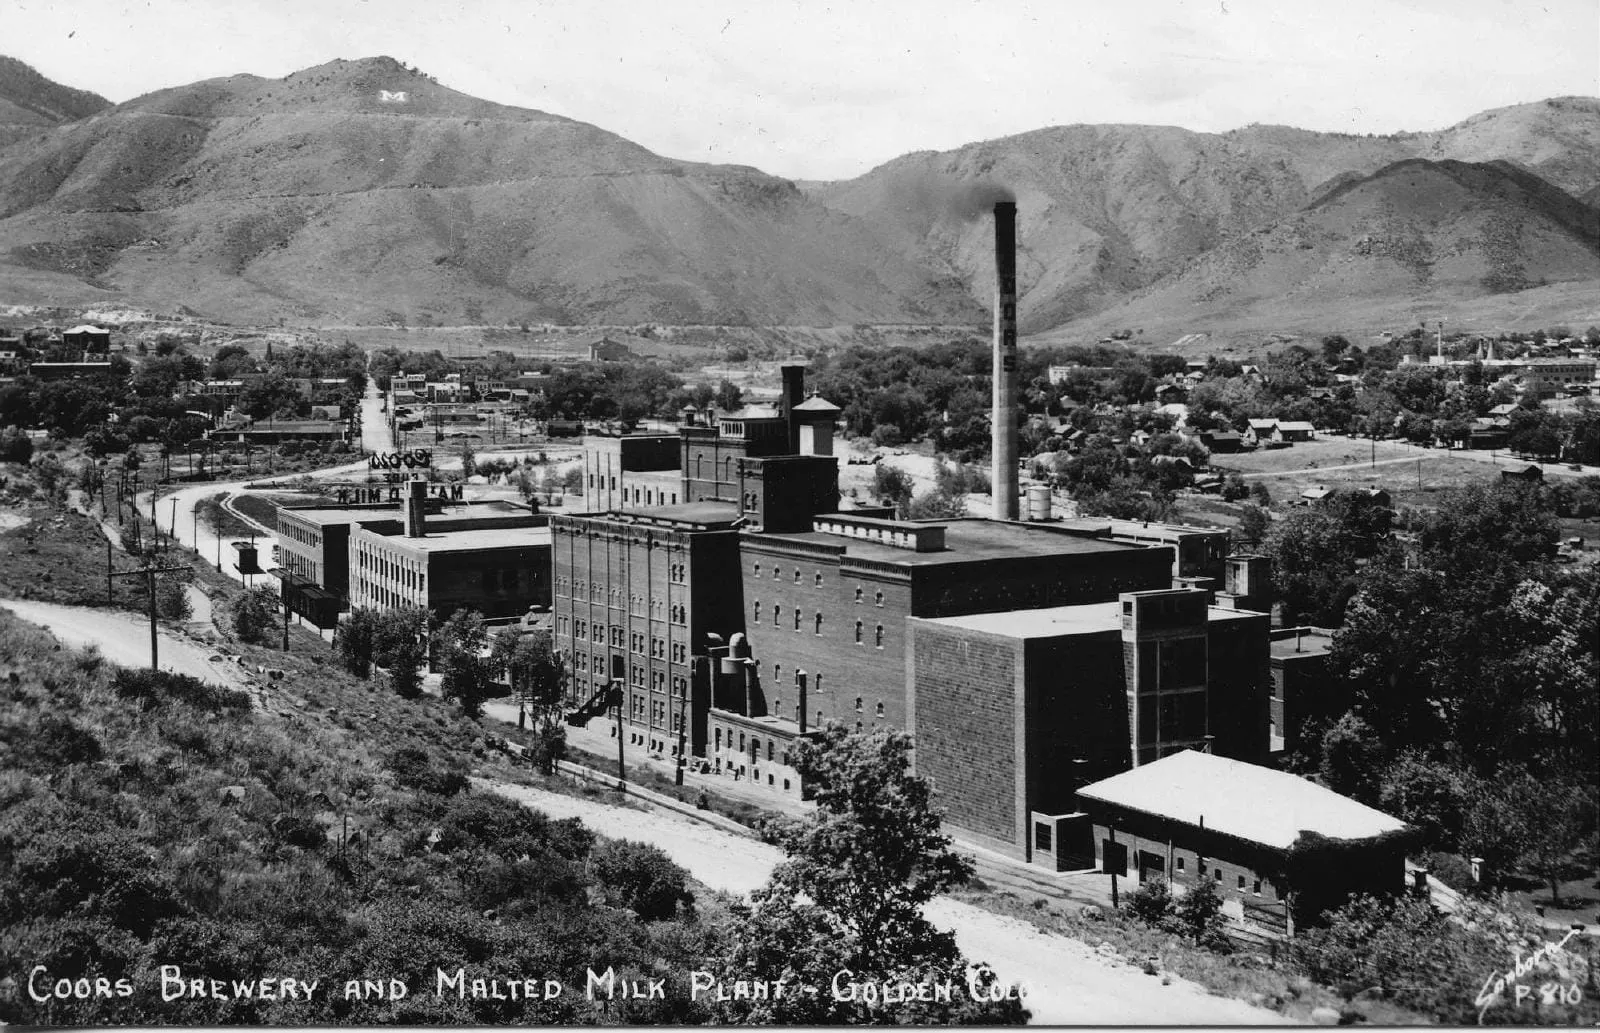 Coors brick brewery, 1930s, with a smokestack producing smoke and Mt. Zion with the M in the background